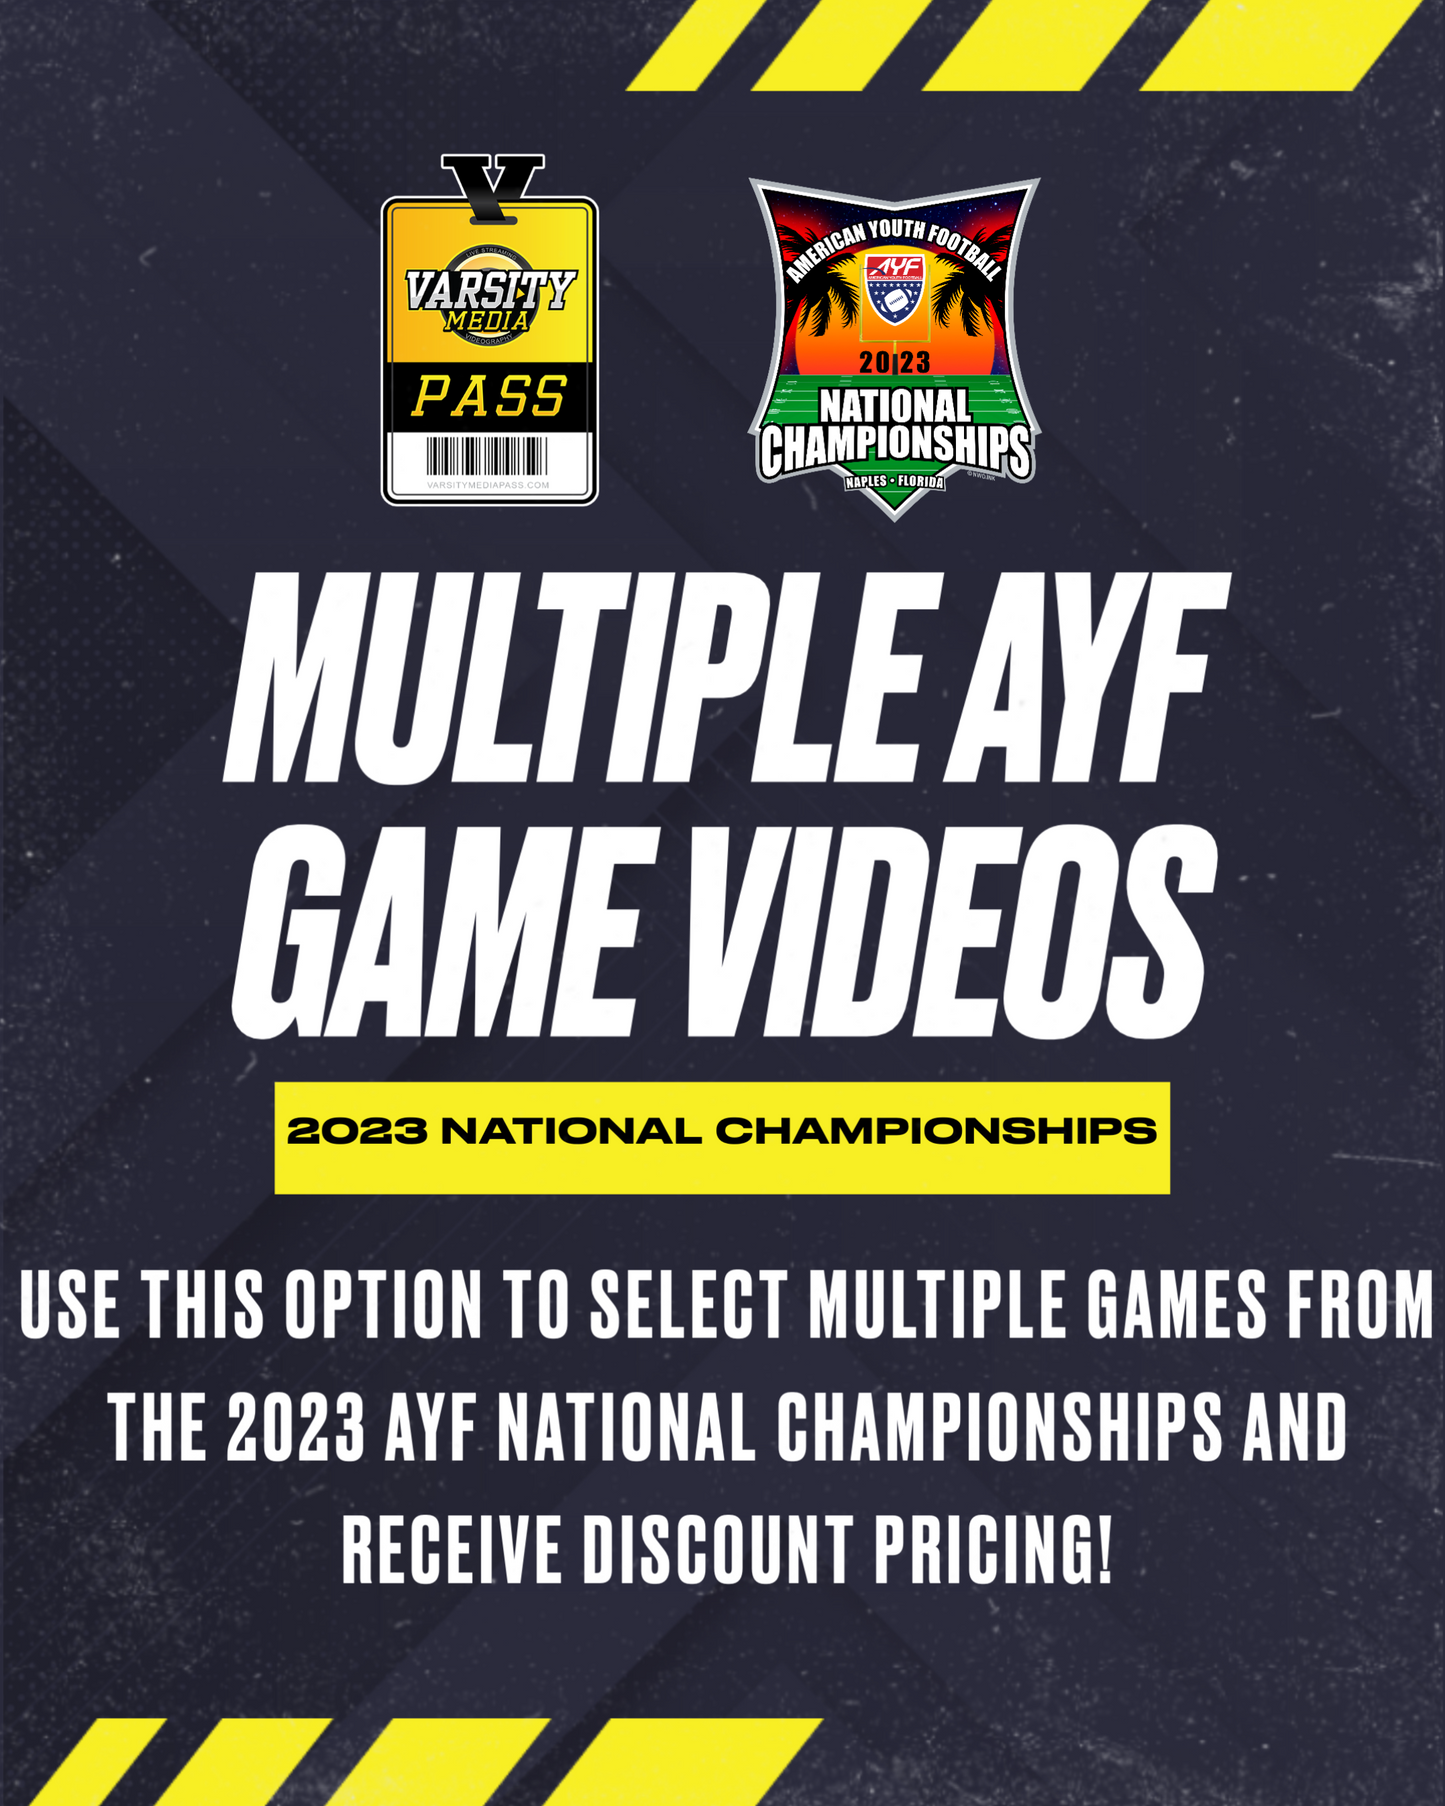 2023 AYF MULTIPLE GAME VIDEOS- THIS IS NOT LIVE STREAMING!